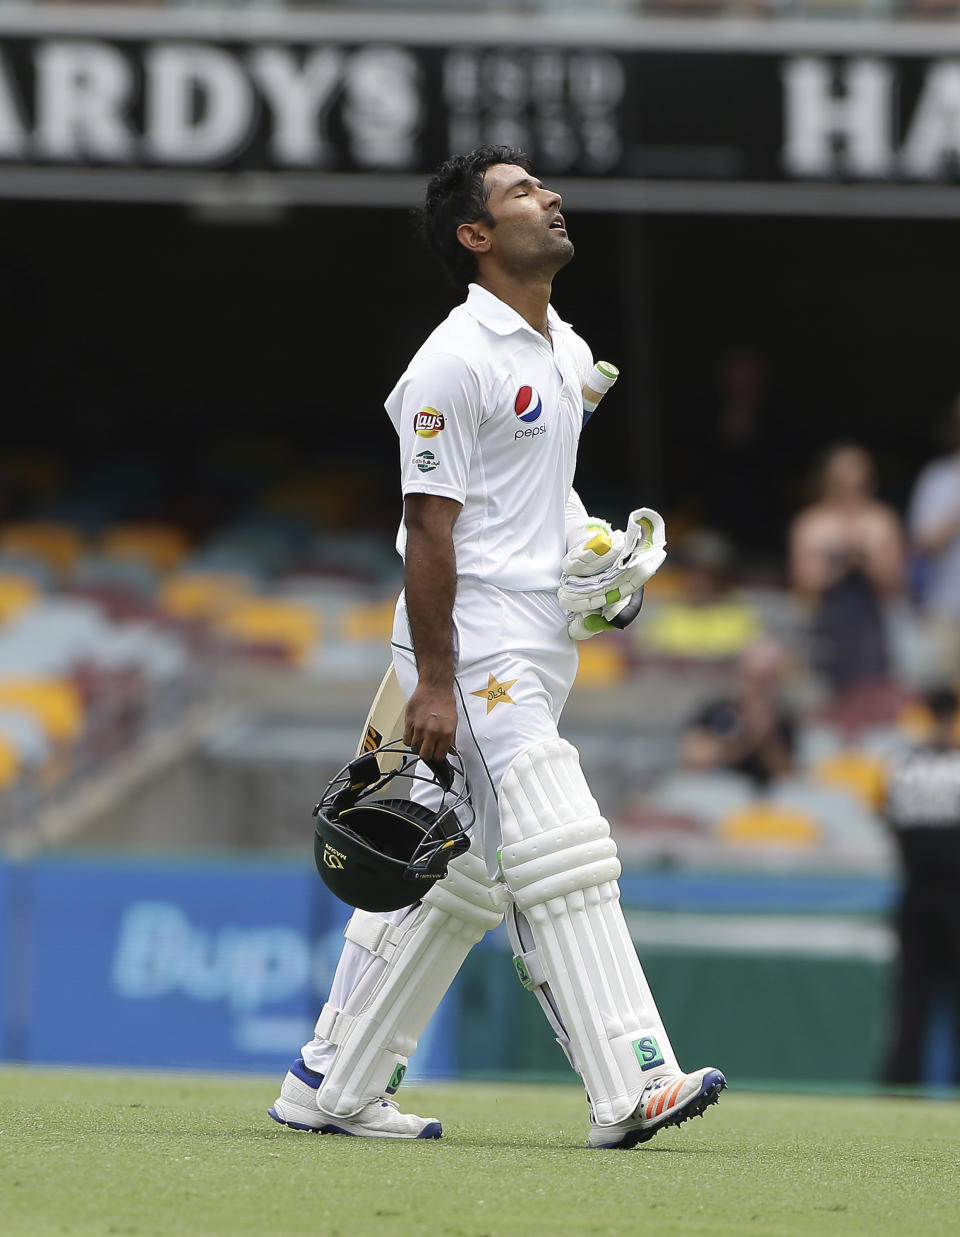 Pakistan's Asad Shafiq walks off after he lost his wicket during play on the final day of the first cricket test between Australia and Pakistan in Brisbane, Australia, Monday, Dec. 19, 2016. (AP Photo/Tertius Pickard)